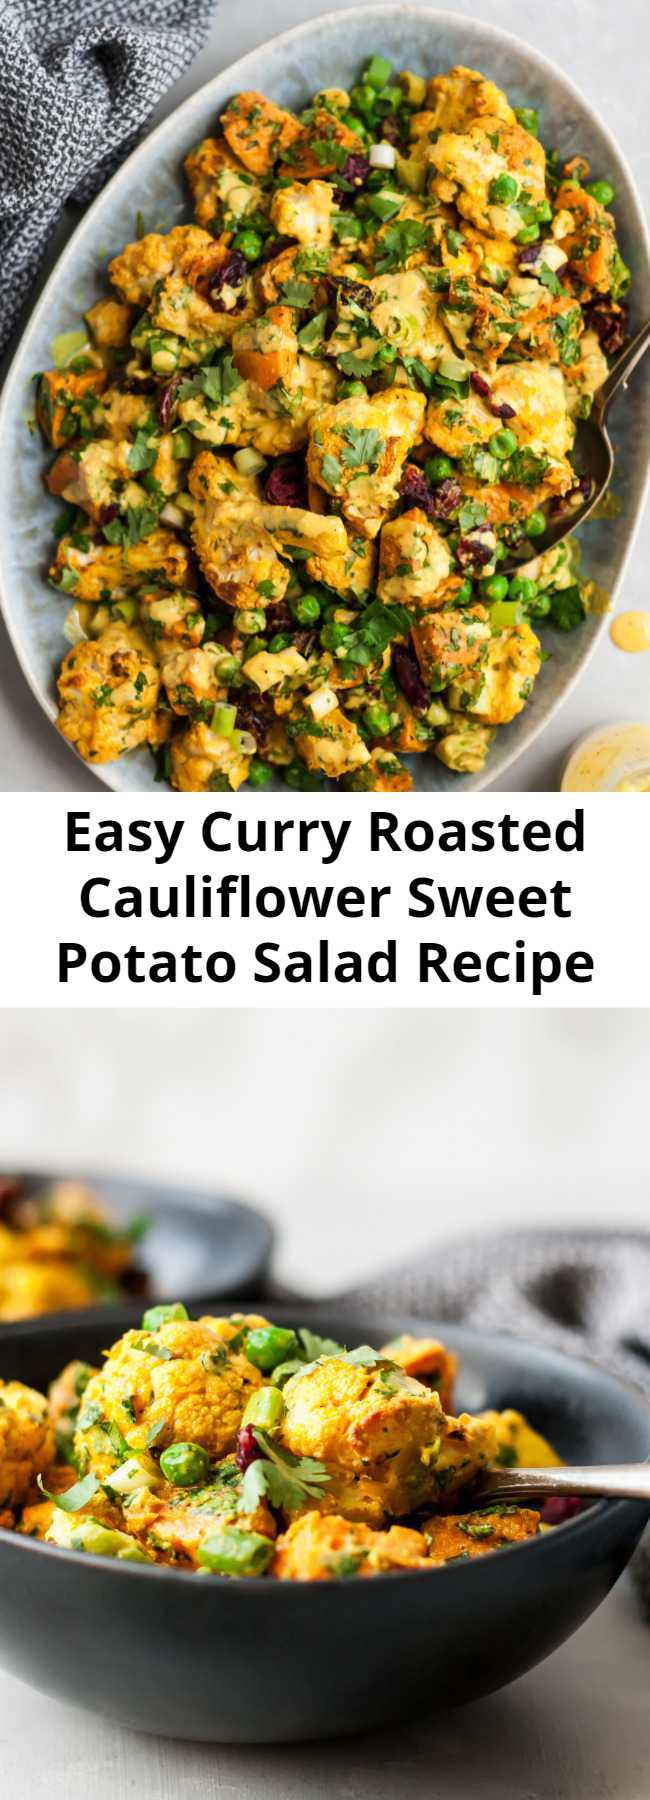 Easy Curry Roasted Cauliflower Sweet Potato Salad Recipe - Vegan and gluten free curry roasted cauliflower sweet potato salad with a creamy curry tahini dressing. This salad is everything you could ever want. Easy to make, packed with veggies and absolutely addicting! #veganrecipes #healthylunch #lunchideas #sweetpotatoes #whole30recipes #dairyfree #glutenfreerecipes #saladrecipes